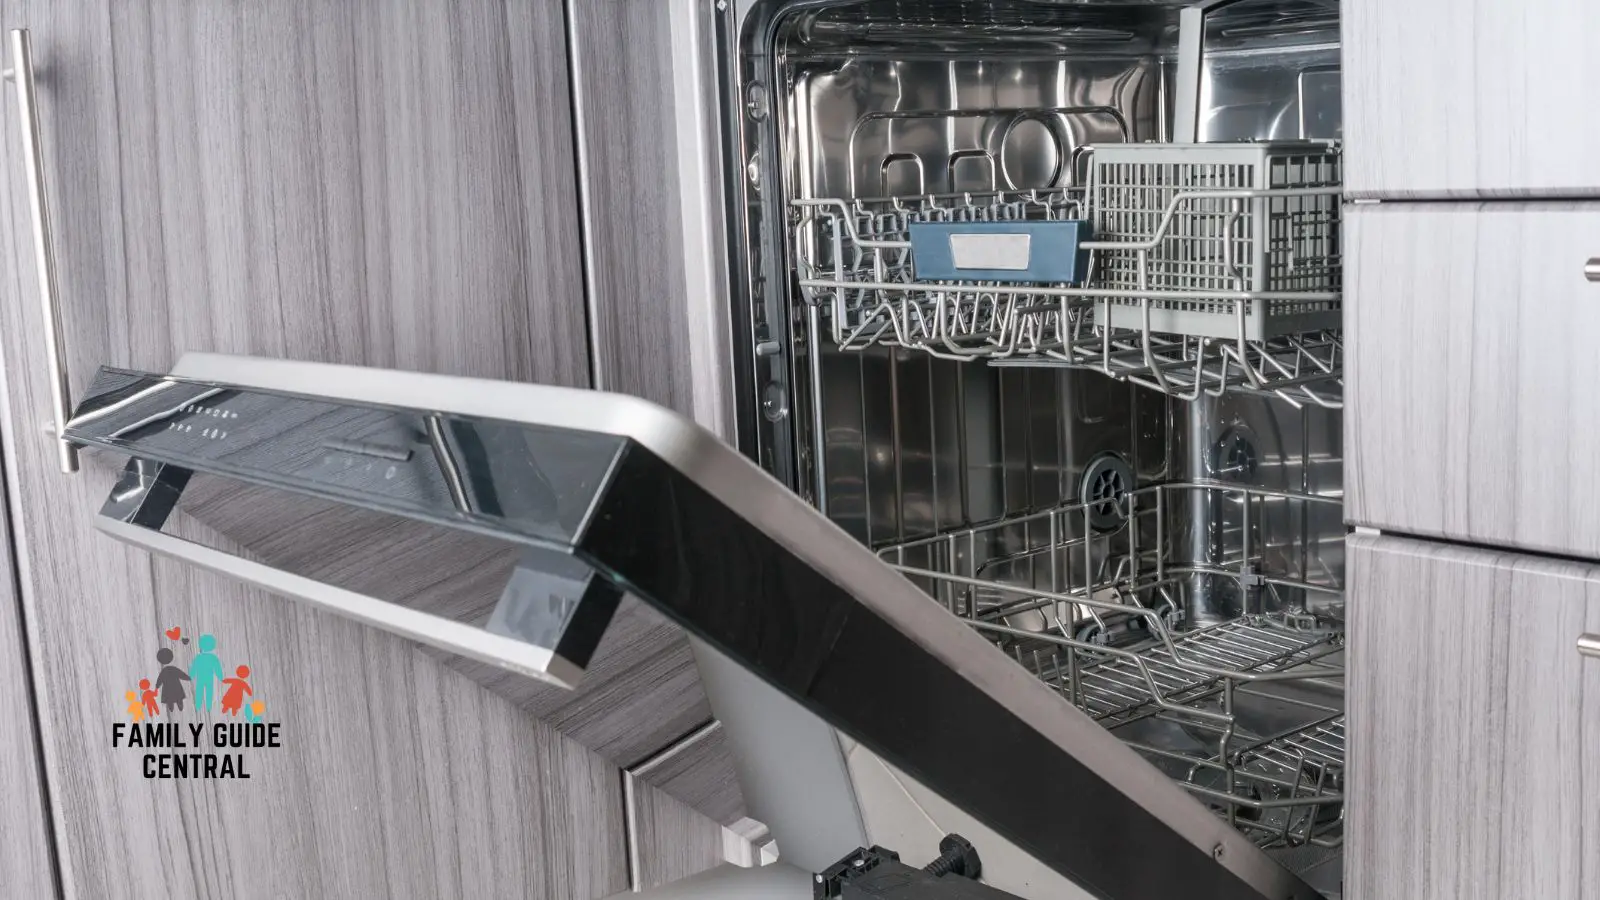 Open door to a dishwasher - familyguidecentral.com